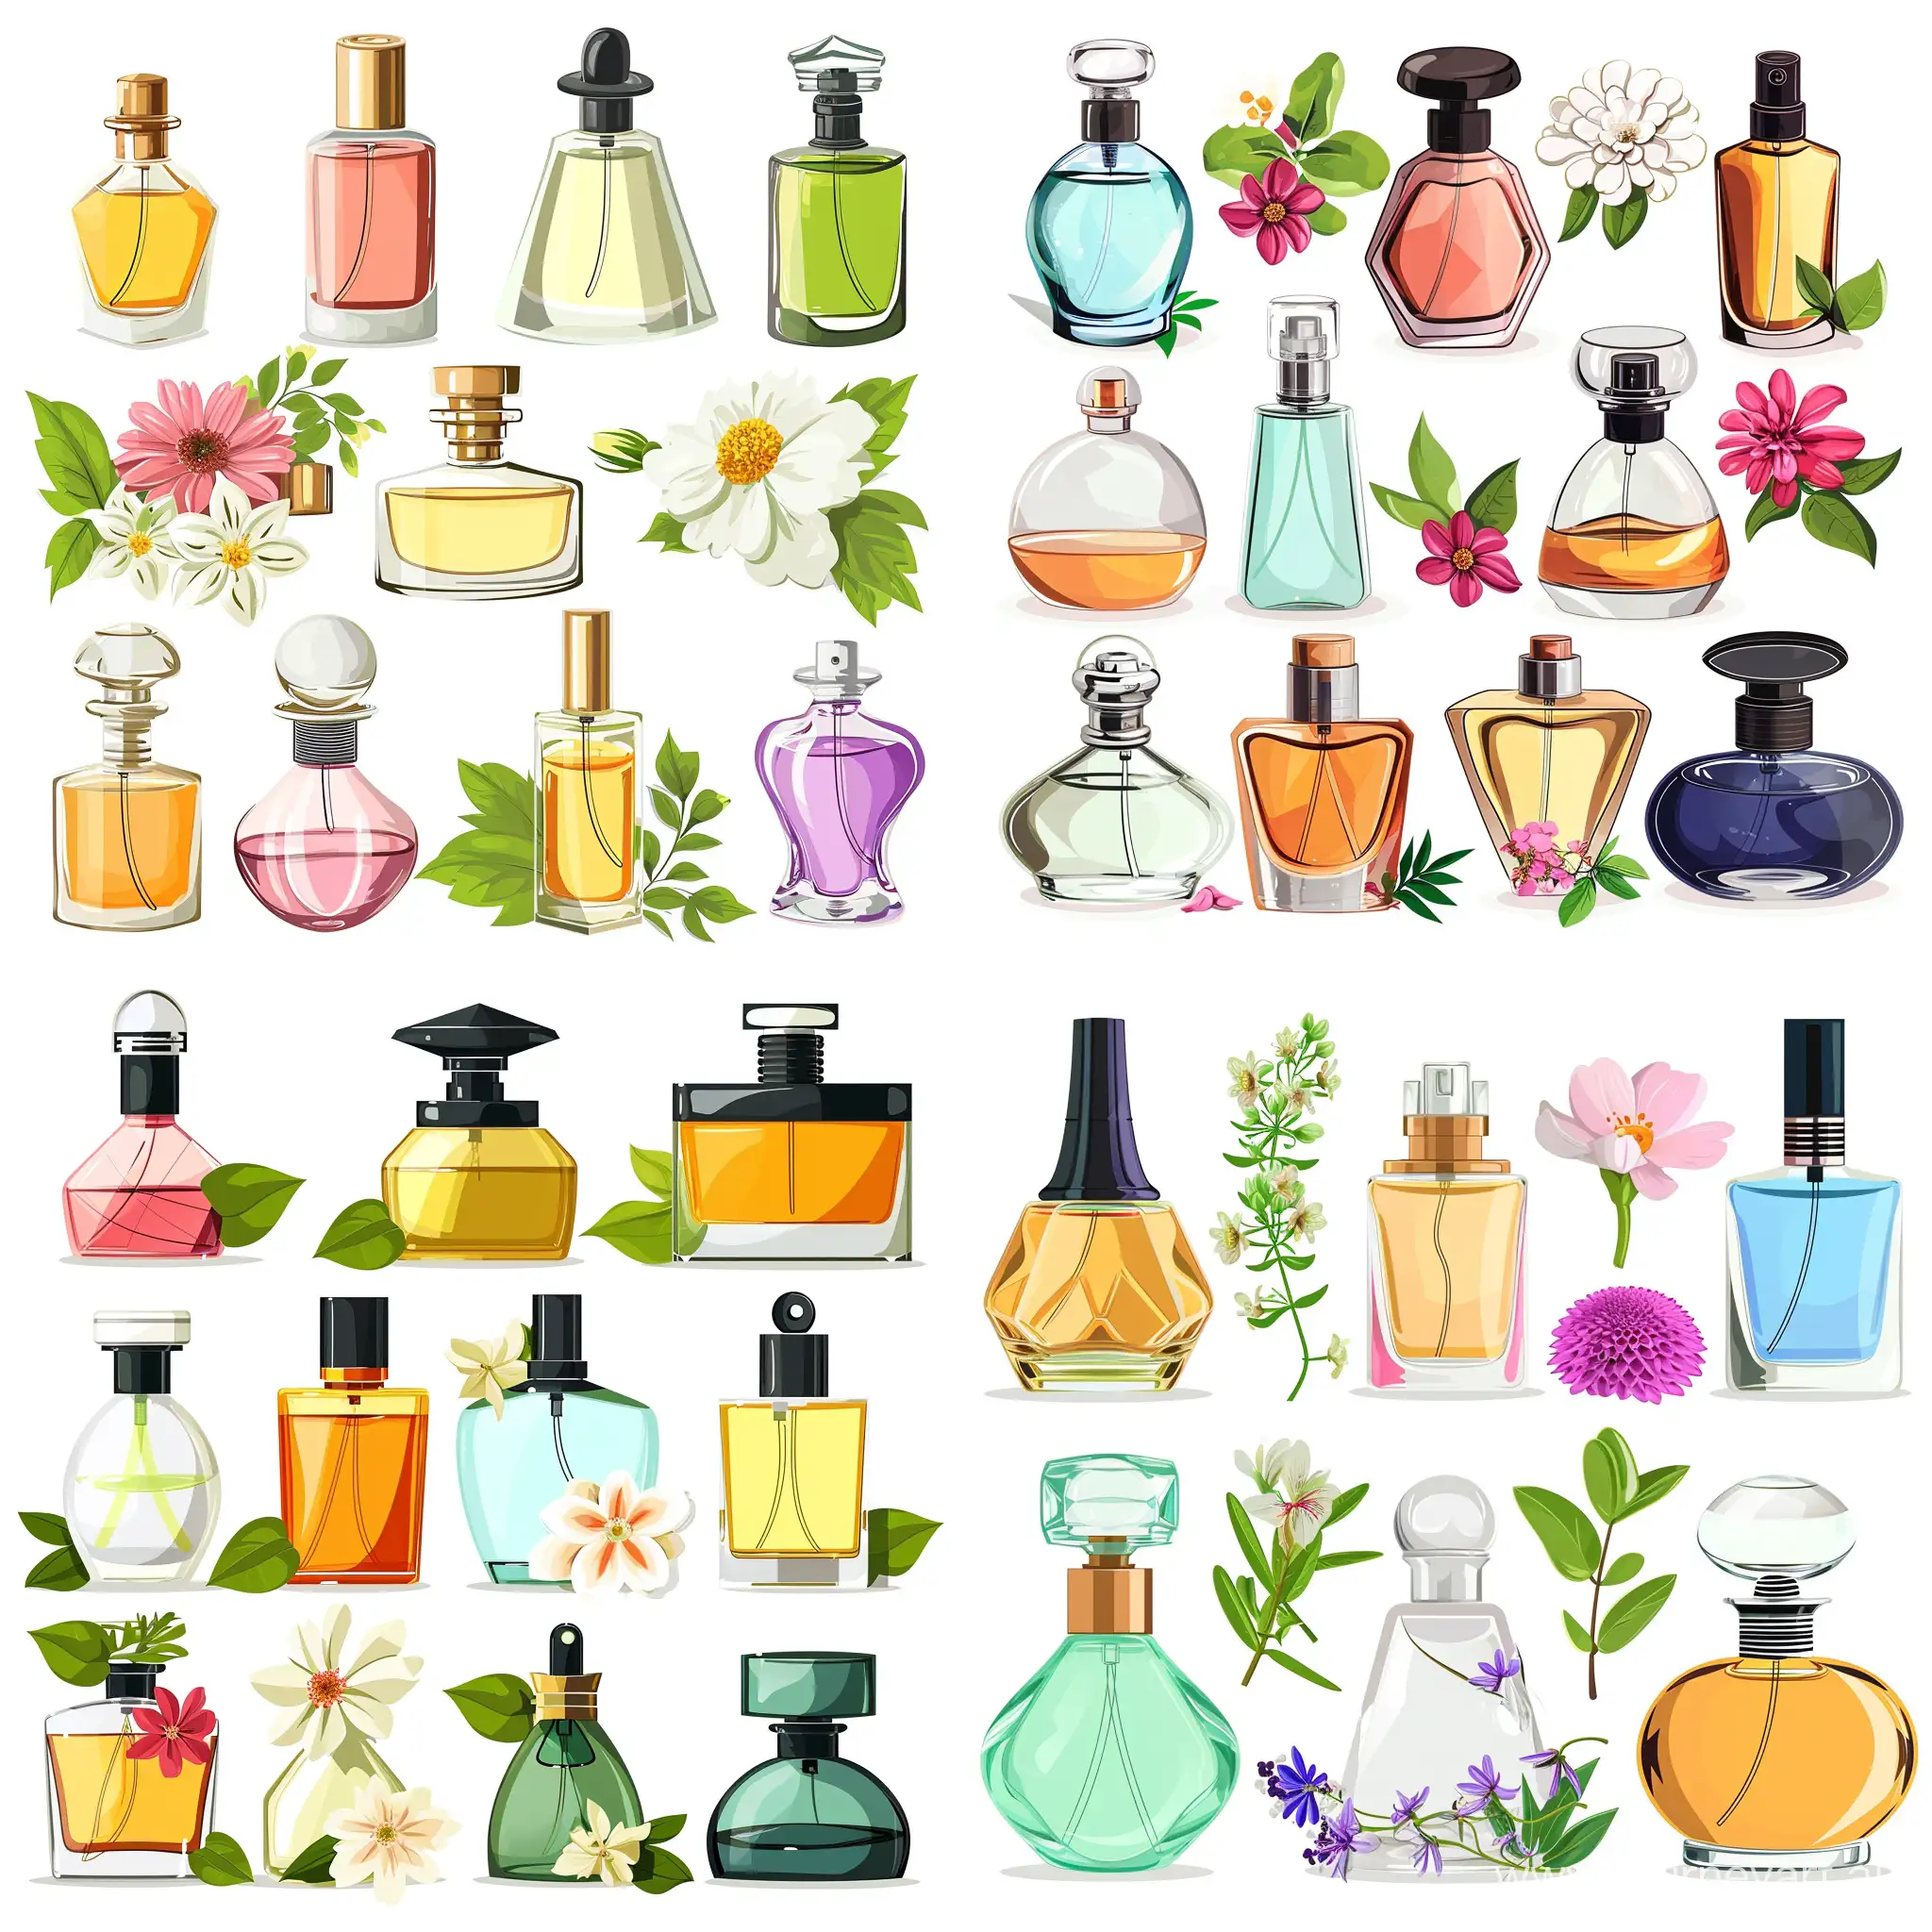 Exquisite-Perfume-Bottles-and-Floral-Compositions